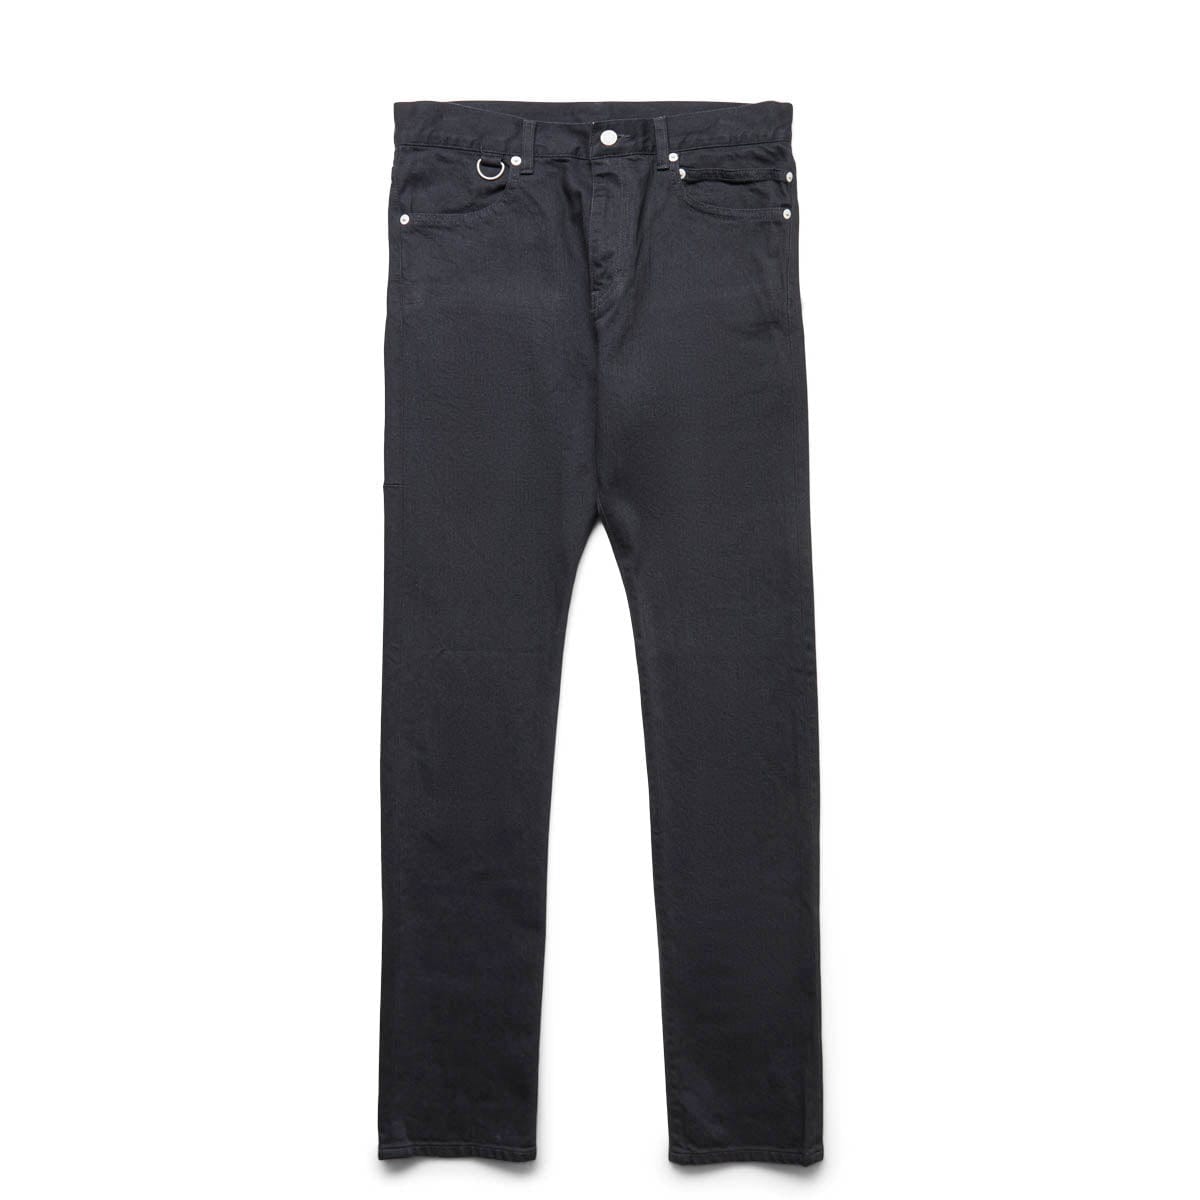 Undercover Bottoms UI2B4505-1 JEANS